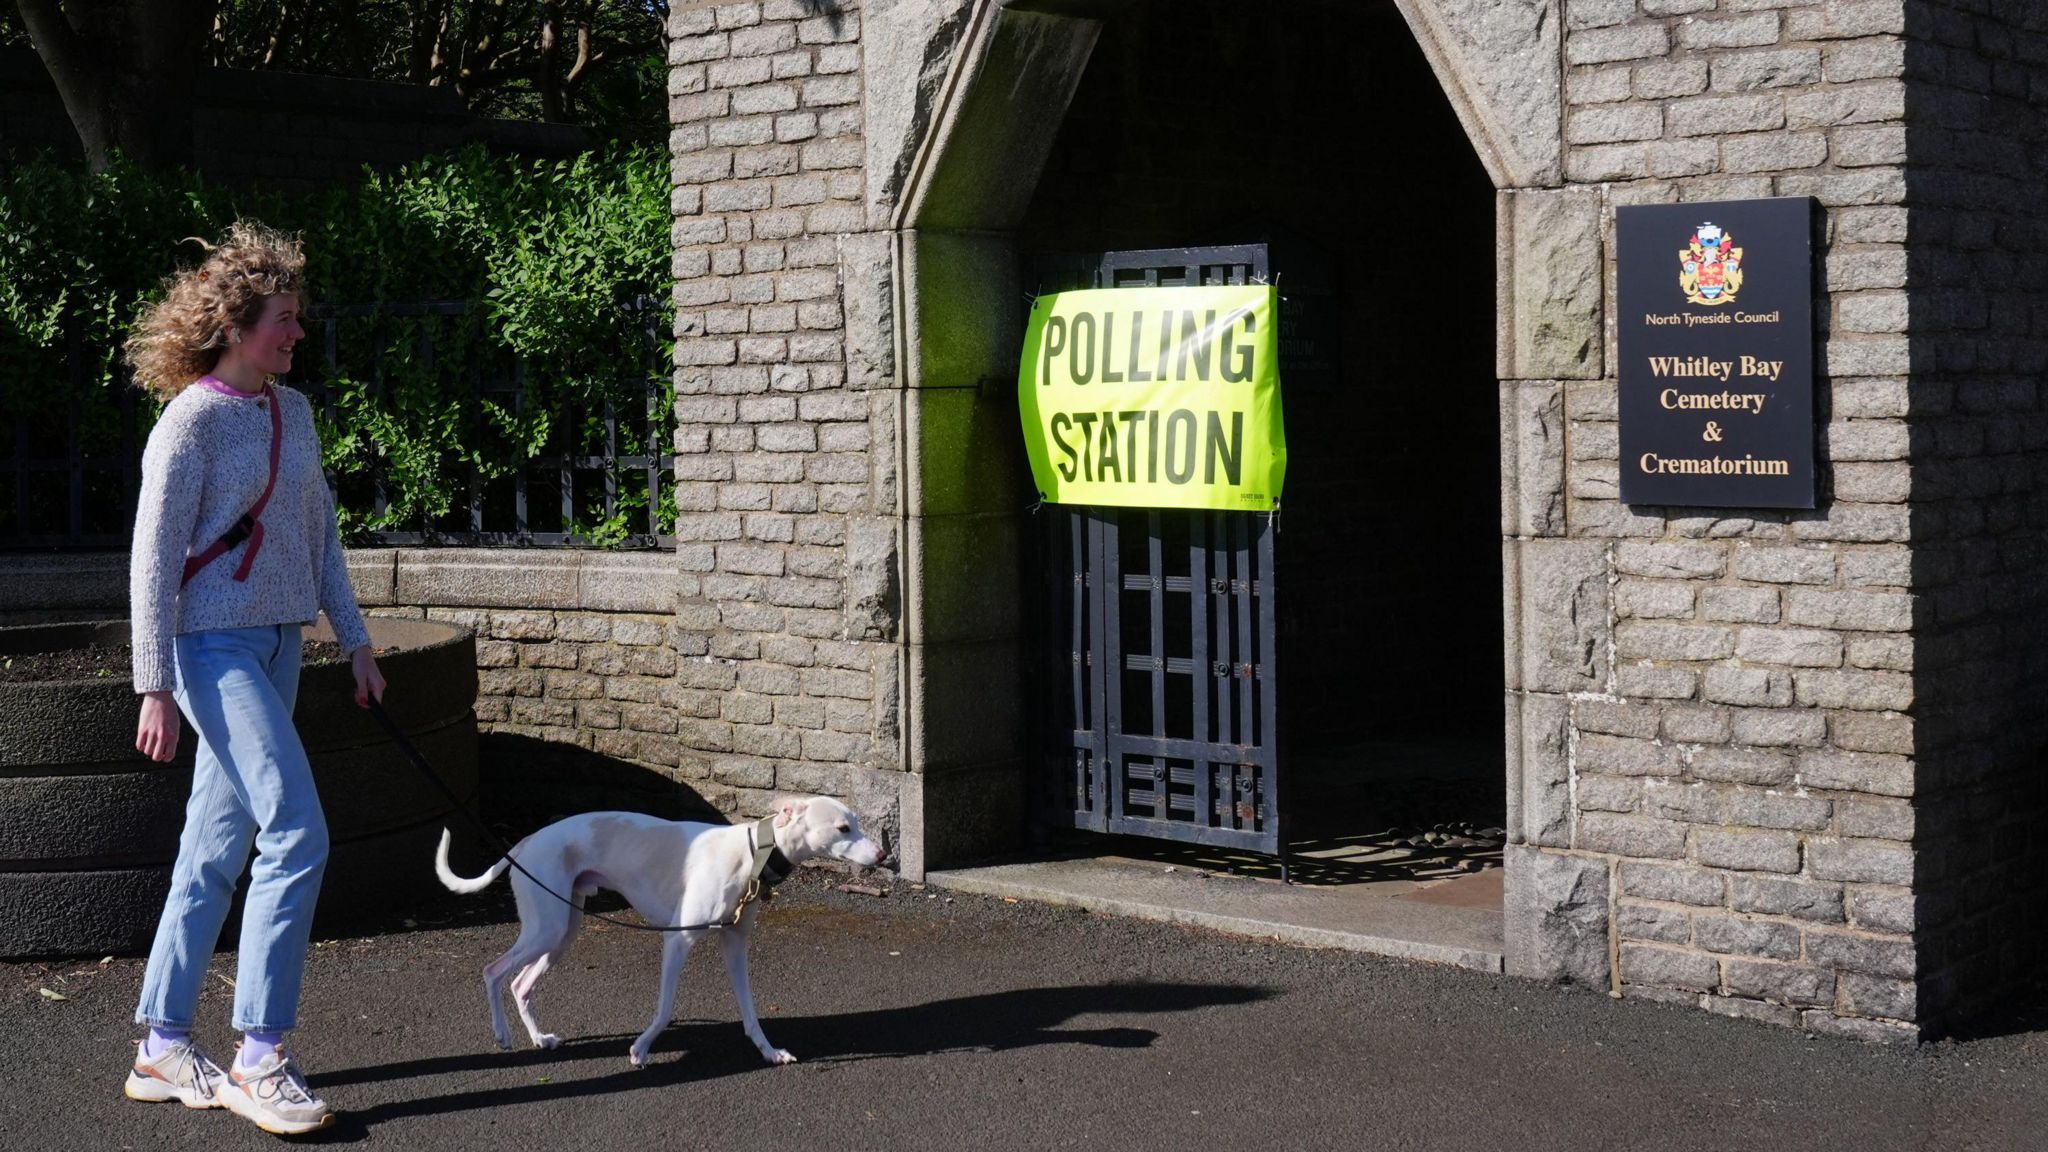 A woman with a dog arrives to cast her ballot at Whitley Bay Cemetery and Crematorium